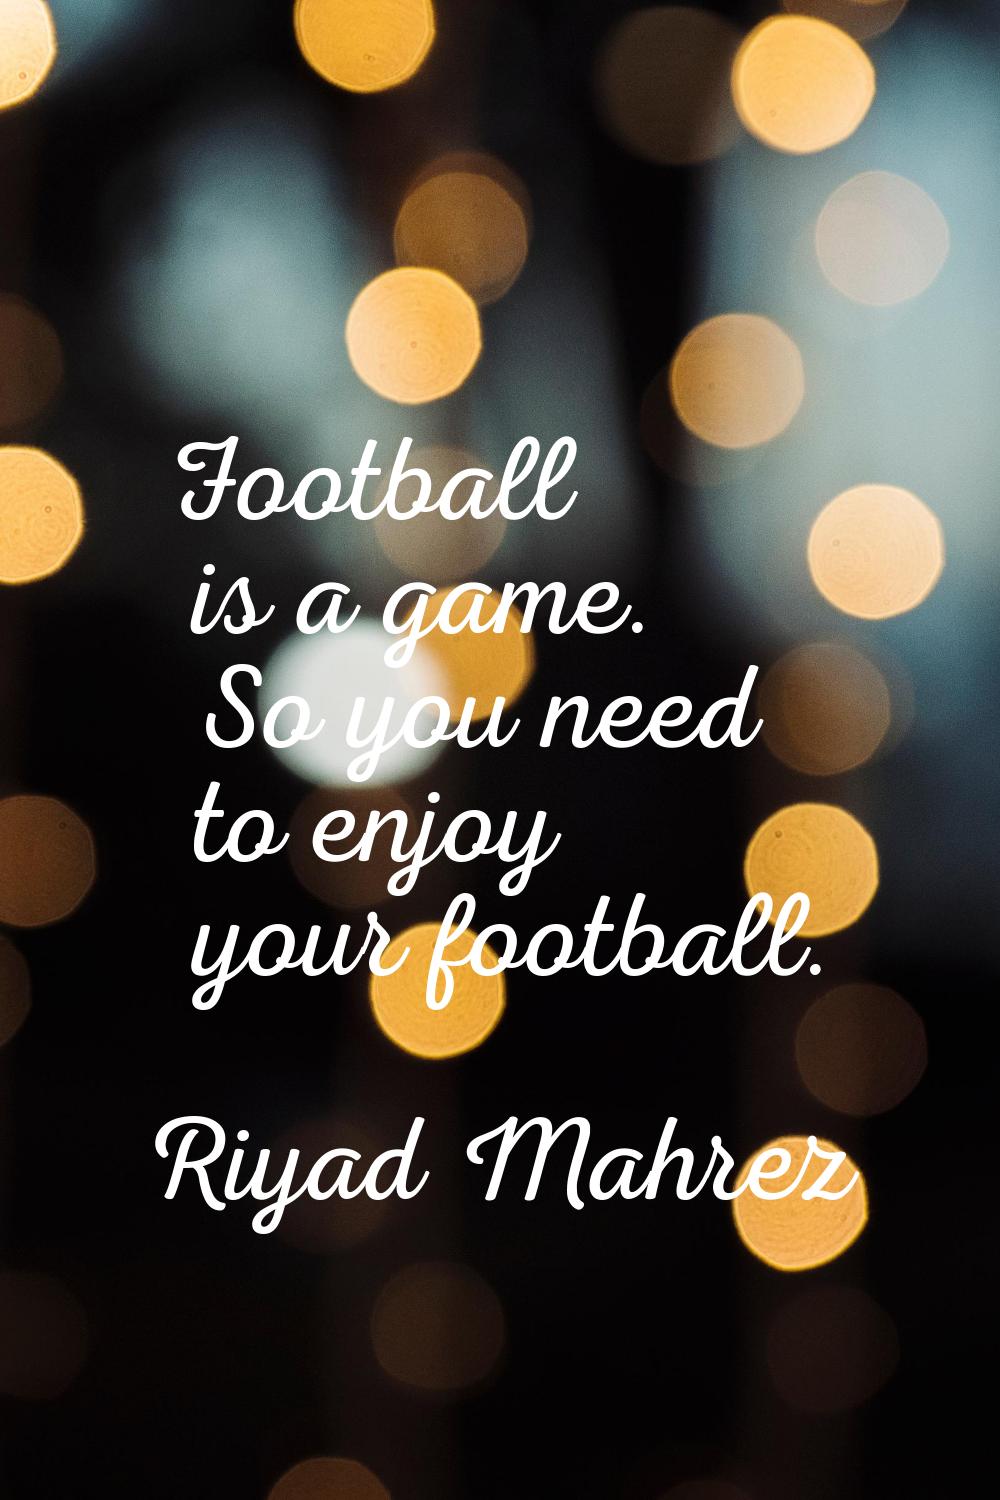 Football is a game. So you need to enjoy your football.